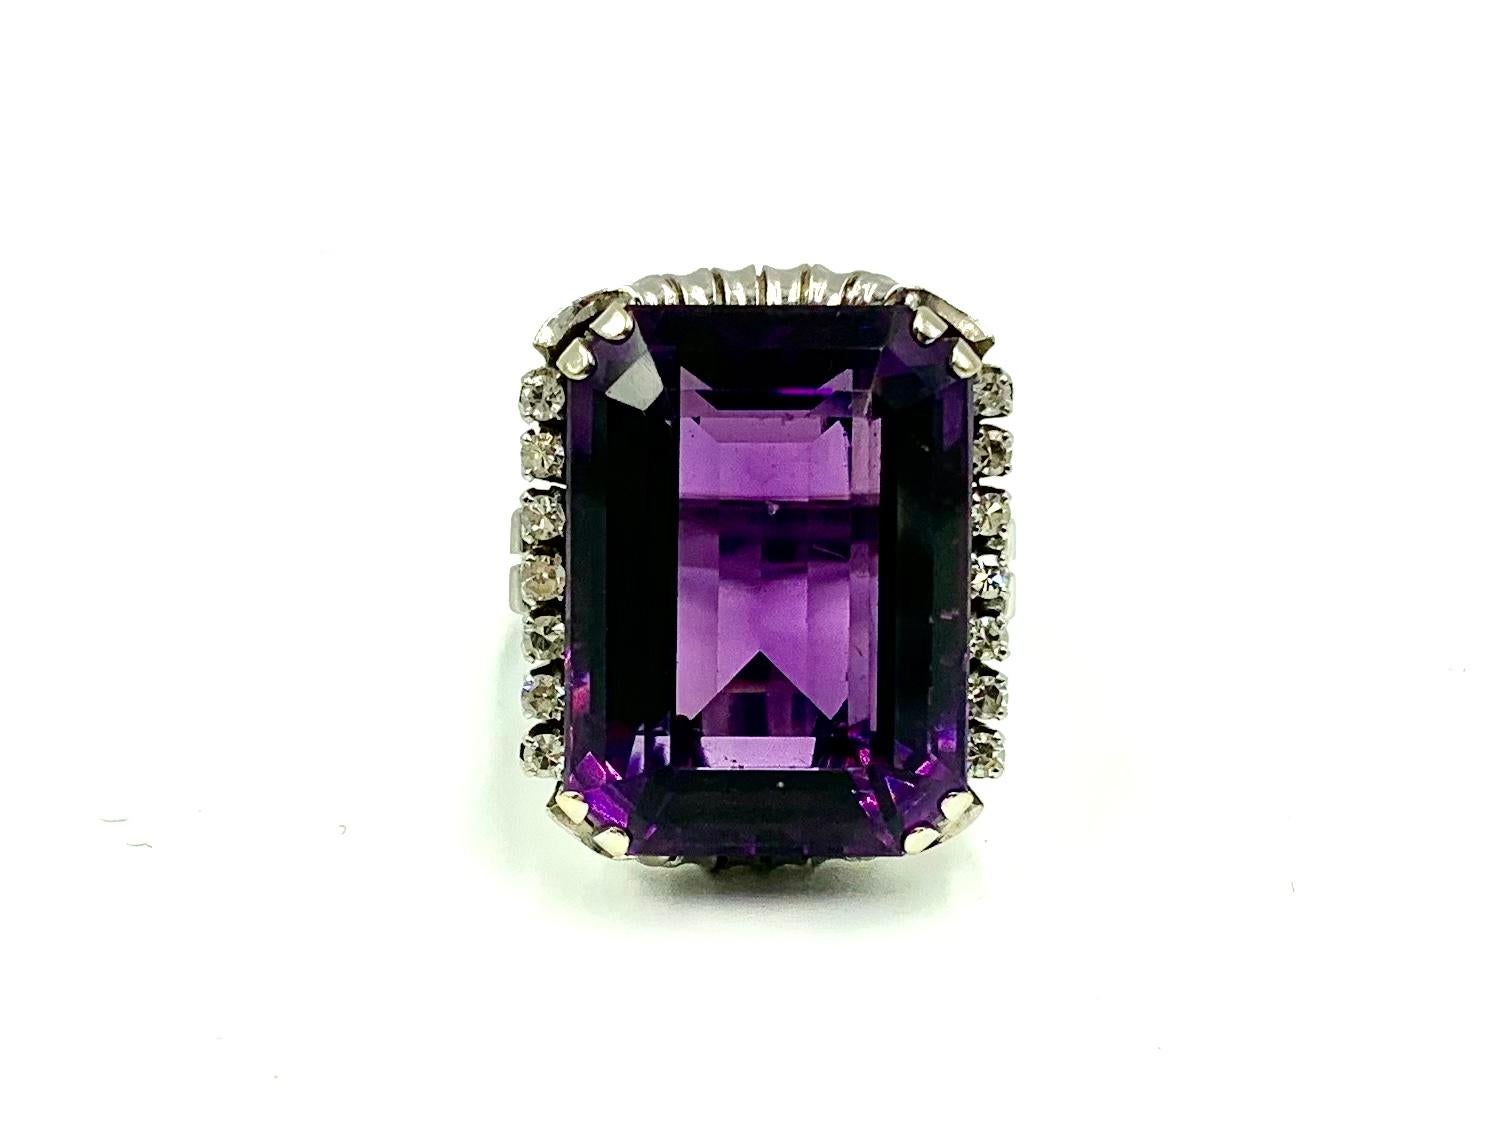 Large Art Deco 22.5 Carat Amethyst, Diamond 18K White Gold Cocktail Ring For Sale 1